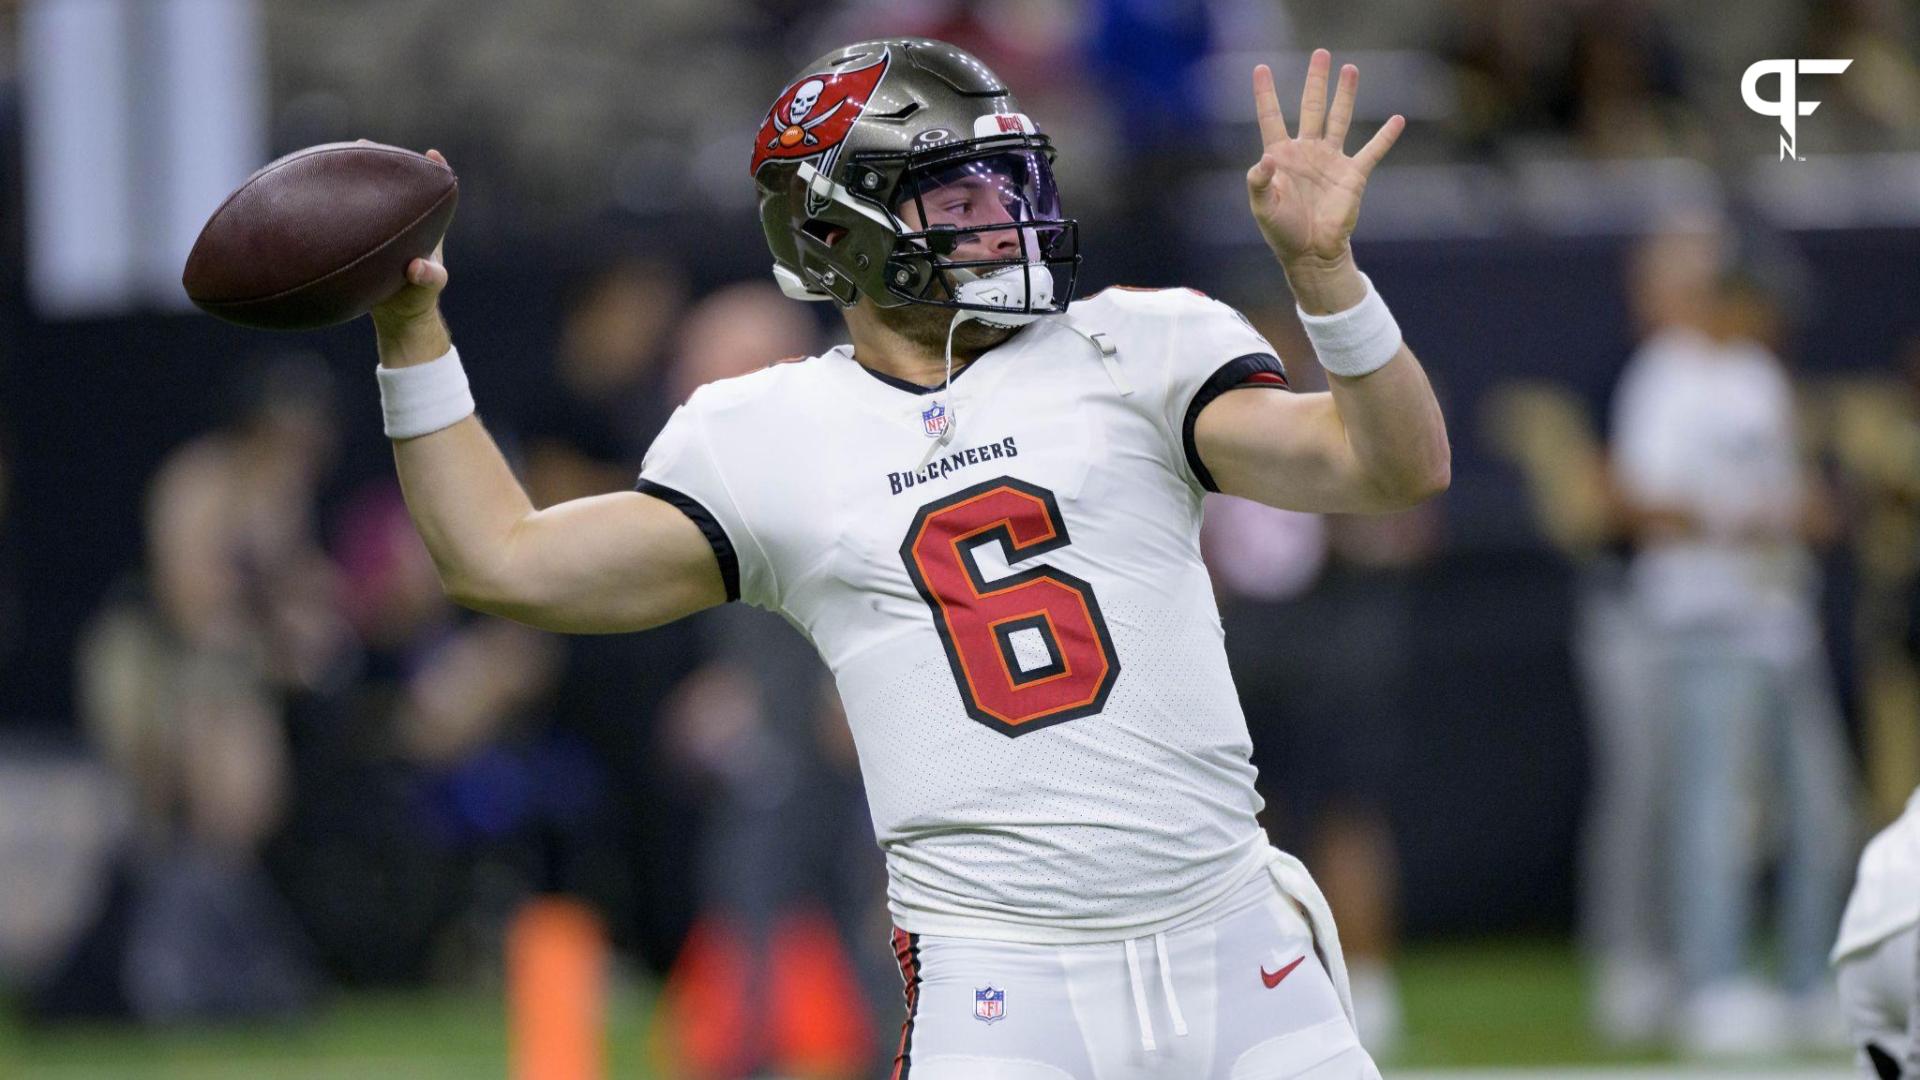 Baker Mayfield Already Popular With Buccaneers, Exec Says - 'He's